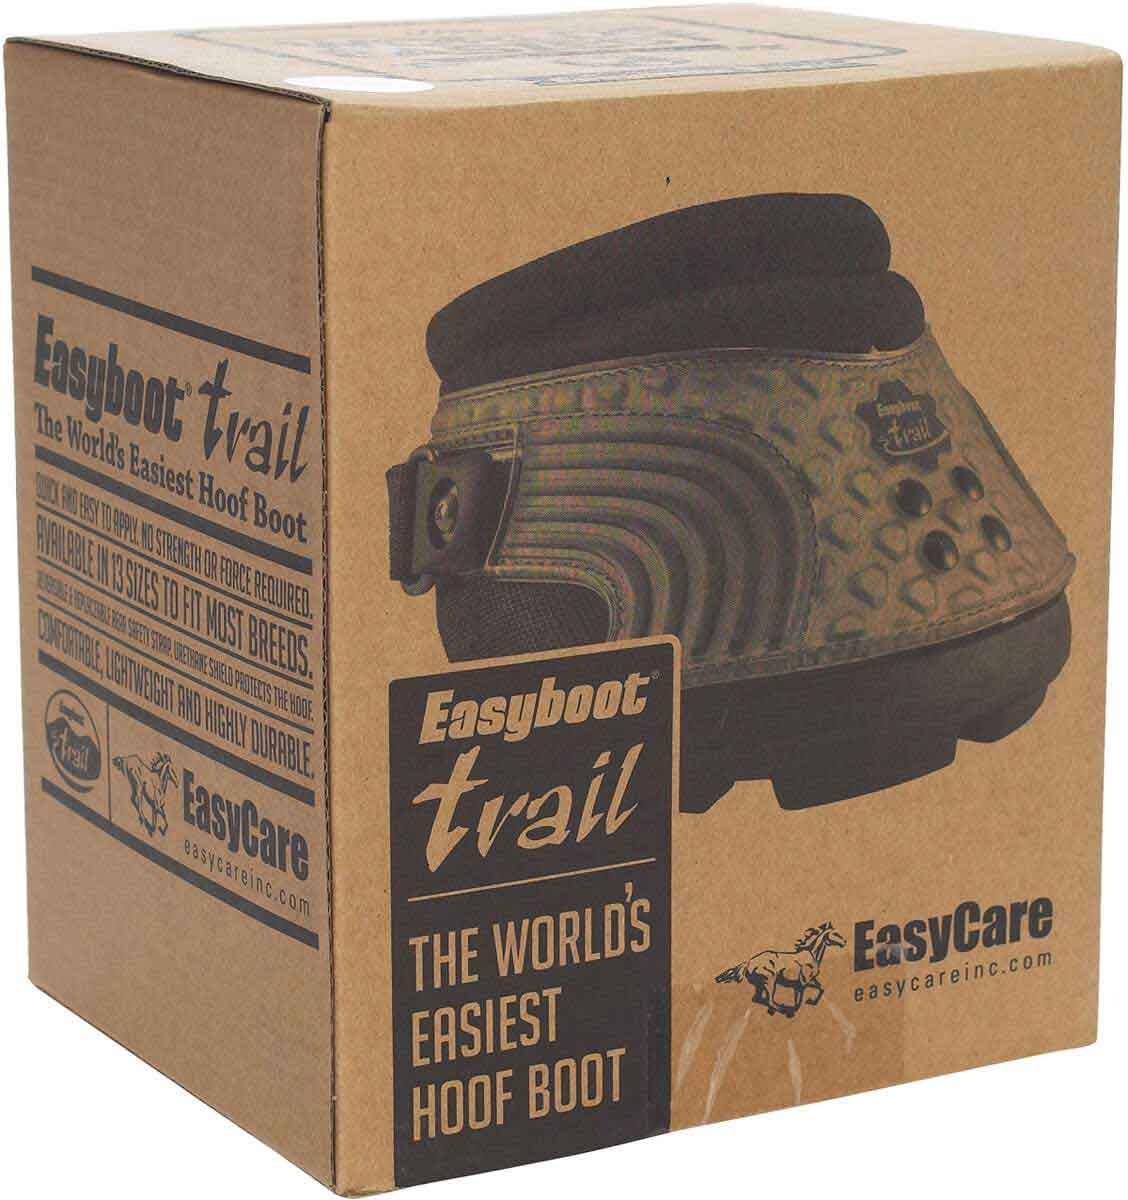 easycare easyboot new trail boot